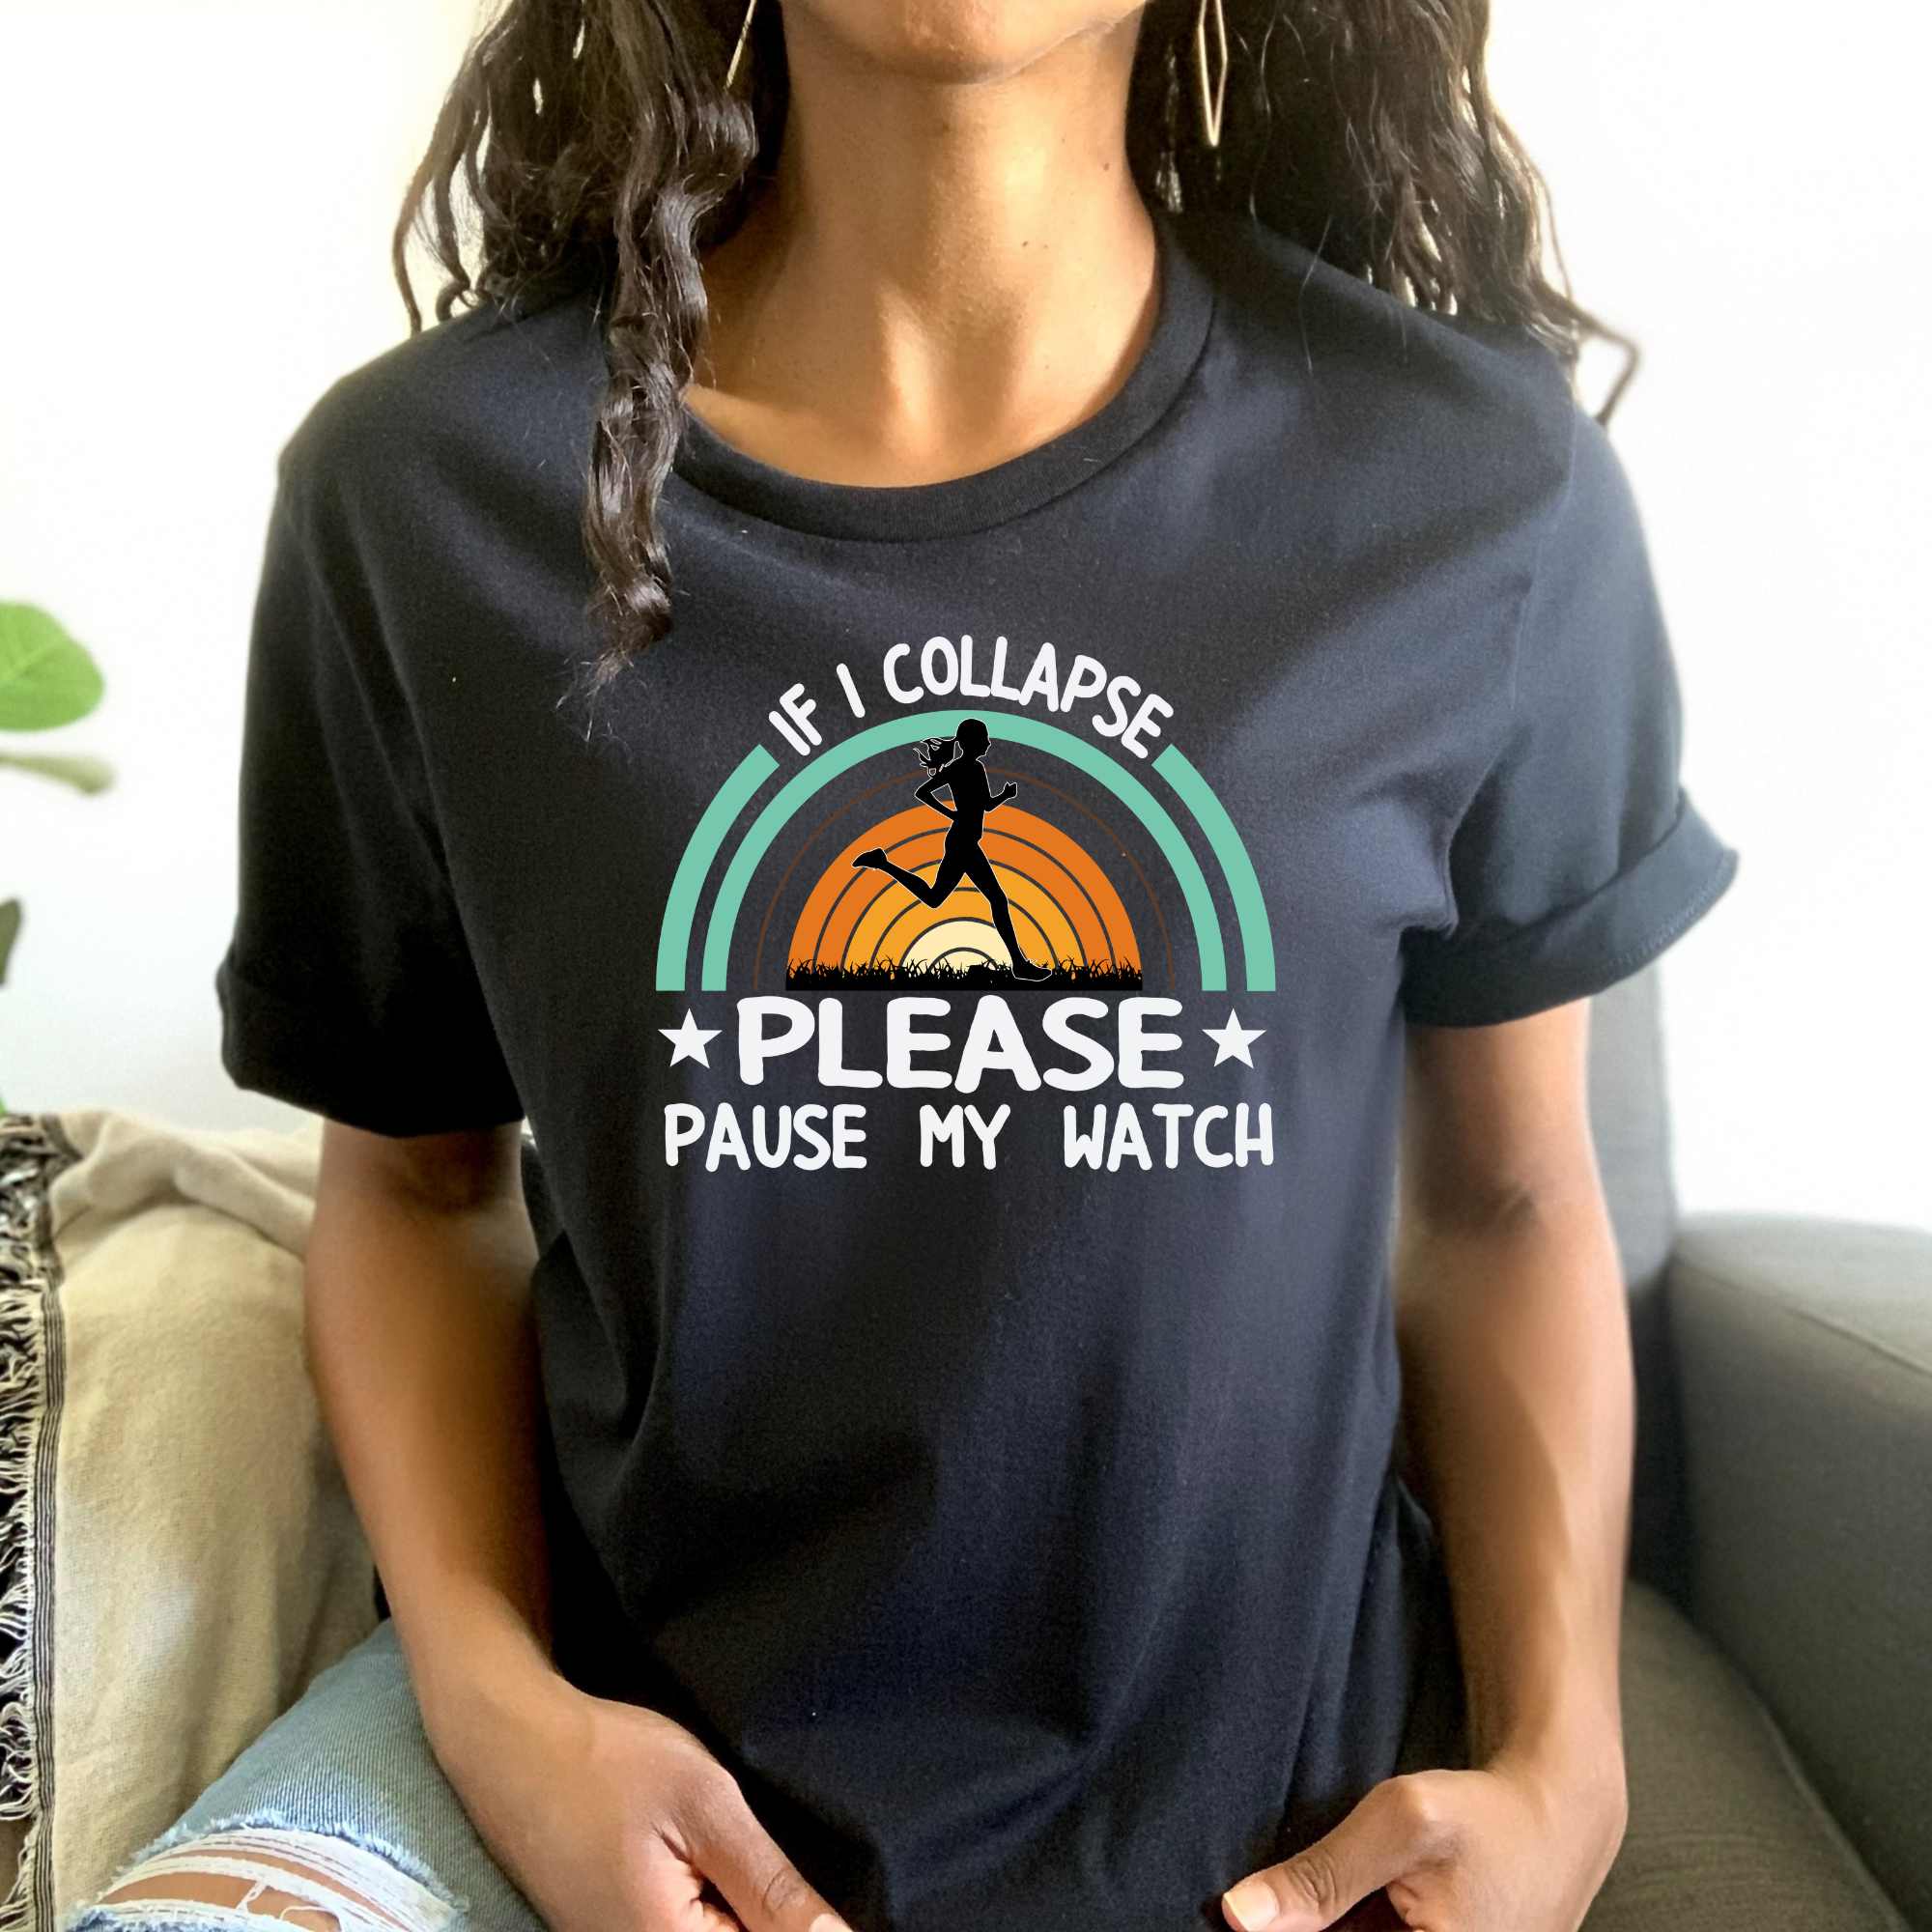 If I Collapse Please Pause My Watch Funny Running Shirts for Men or Women HMDesignStudioUS 611